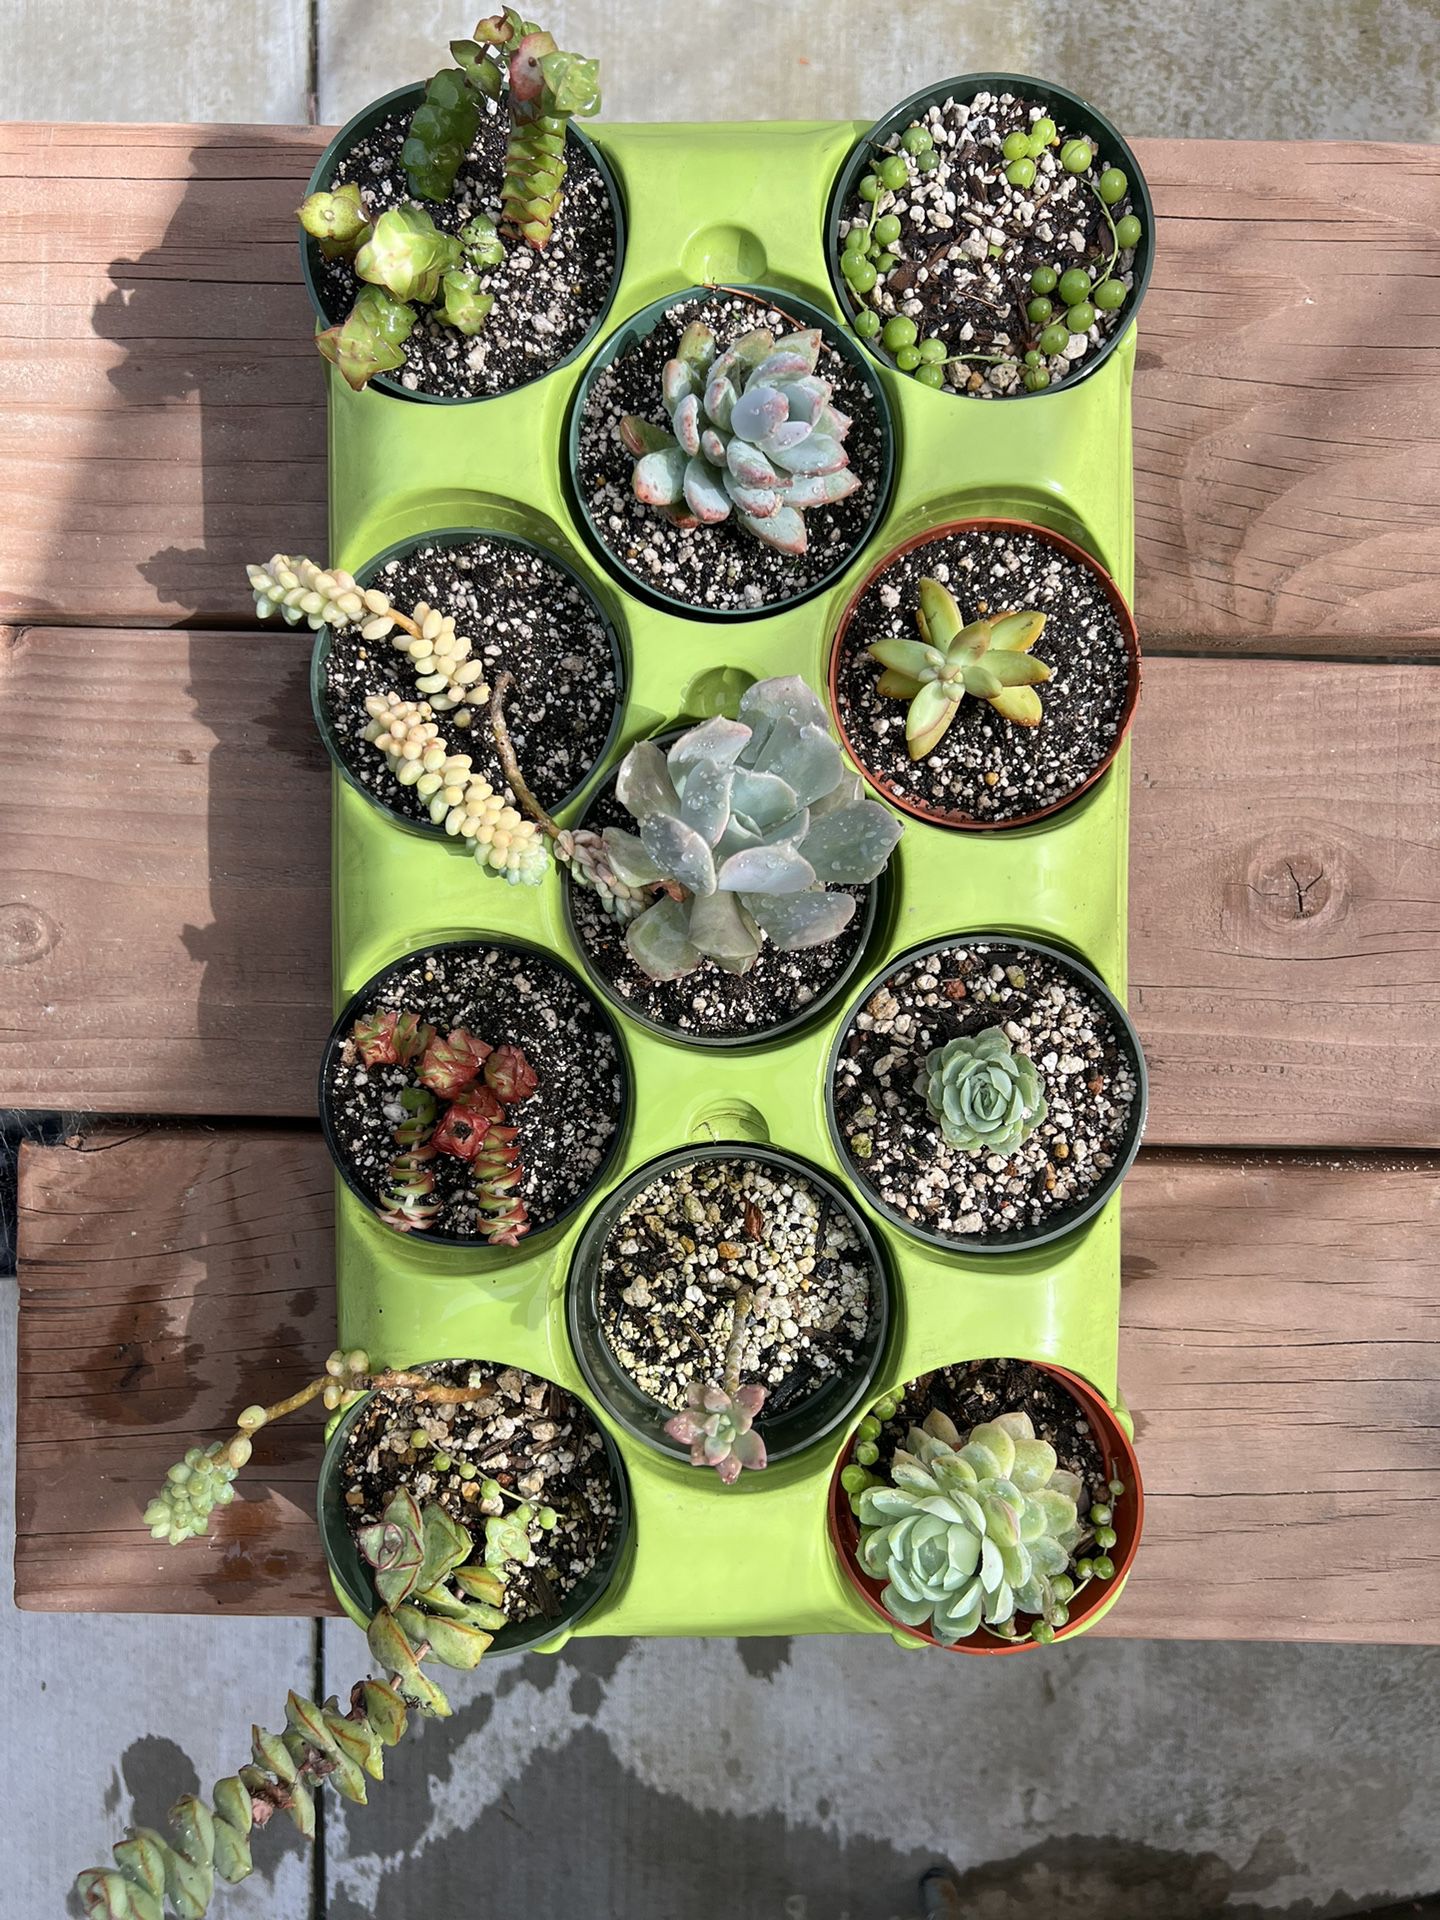 Succulents For You